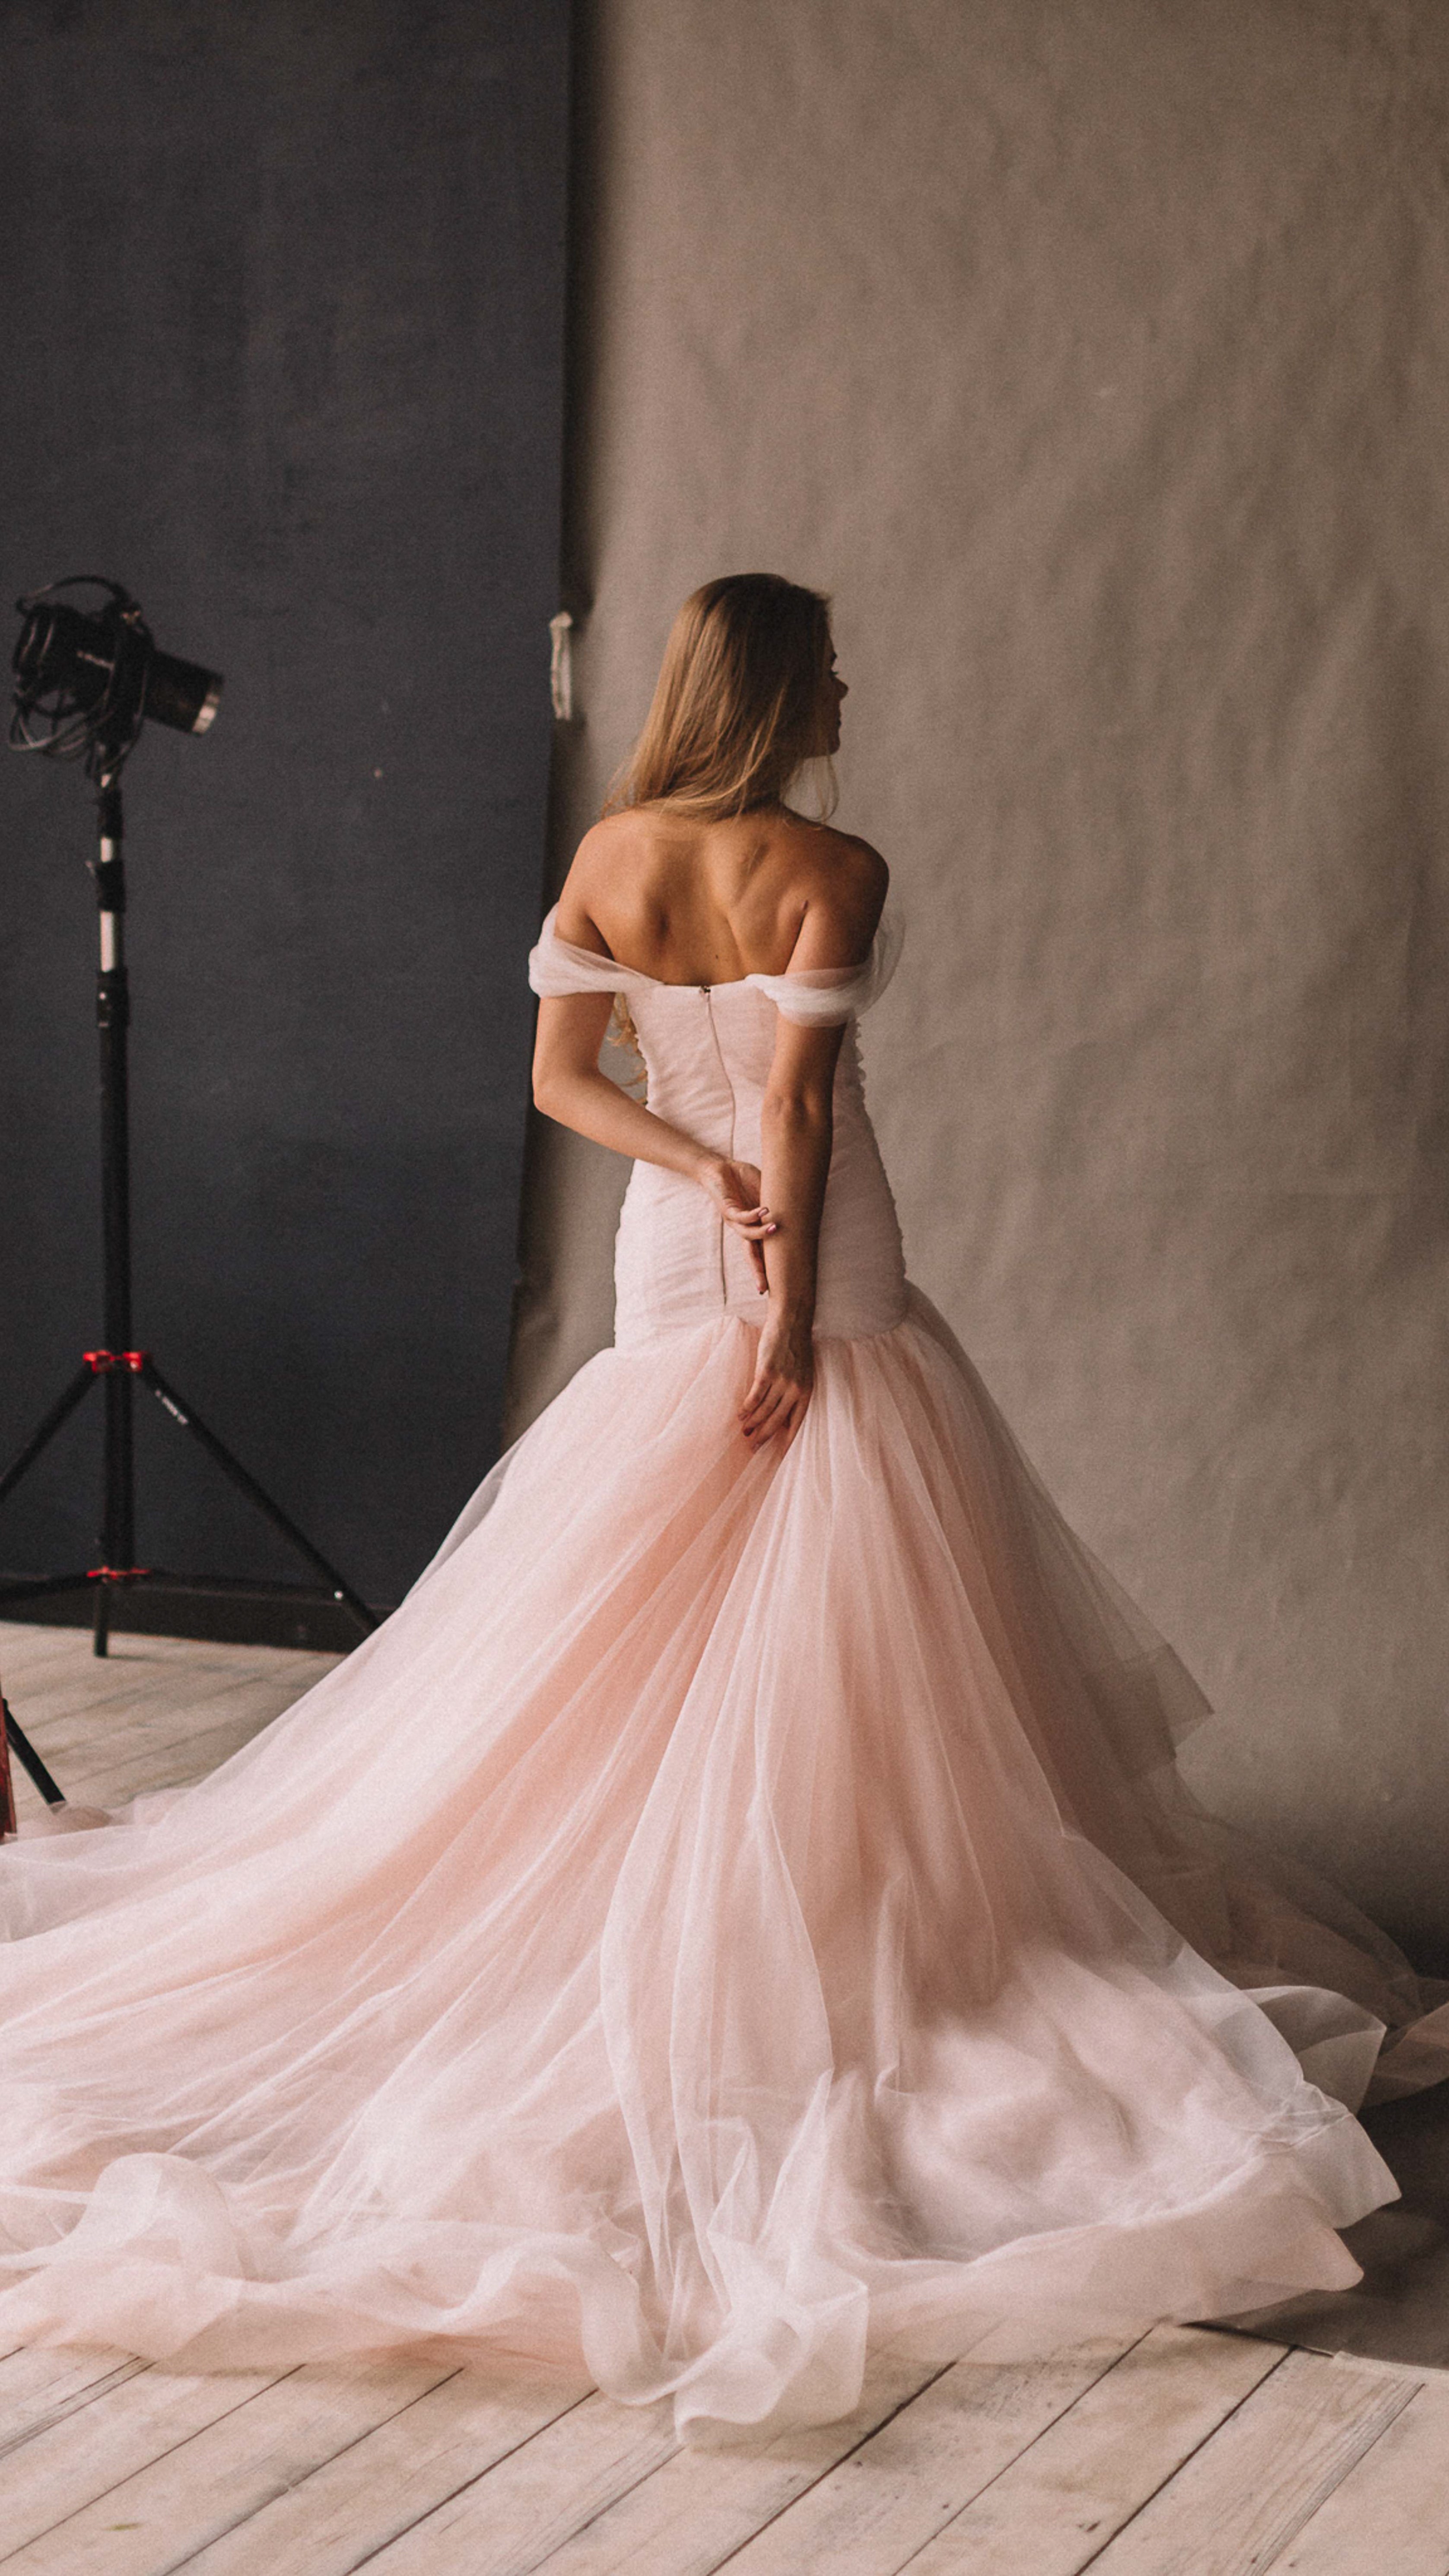 Blush Colored Wedding Dresses For Sale